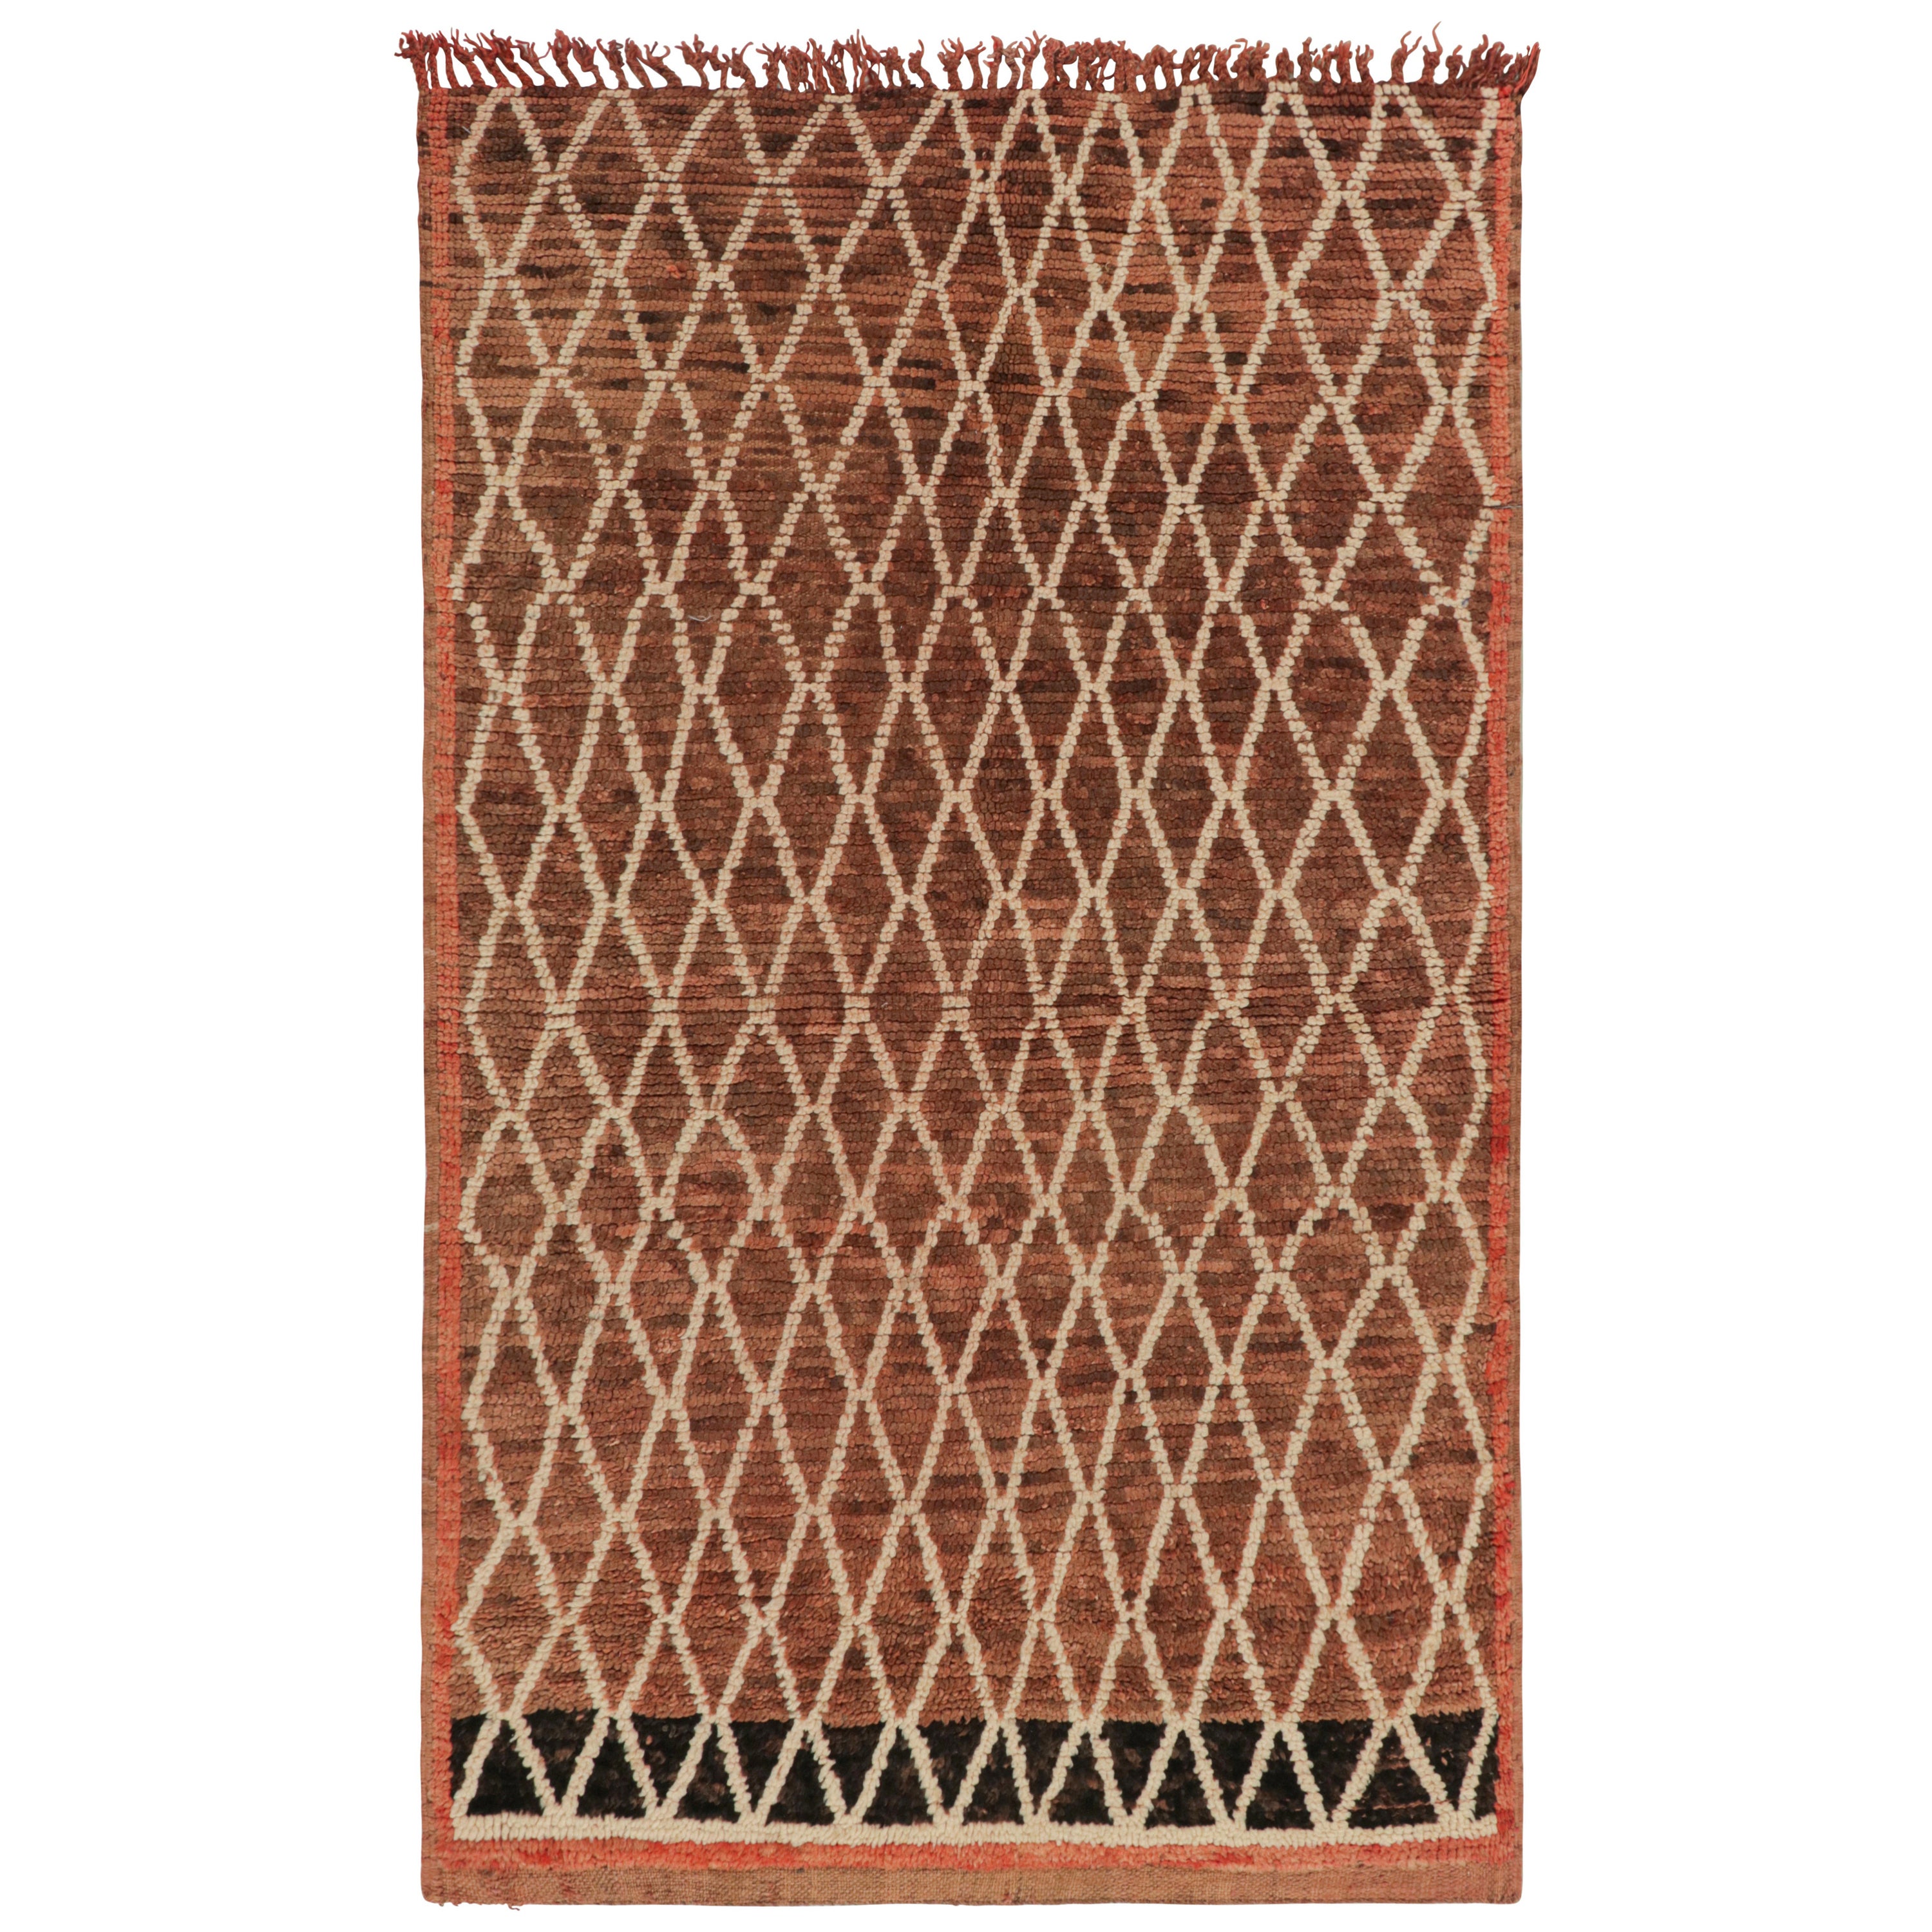 Antique Azilal Moroccan Rug in Brown with Beige Lozenge Pattern from Rug & Kilim For Sale